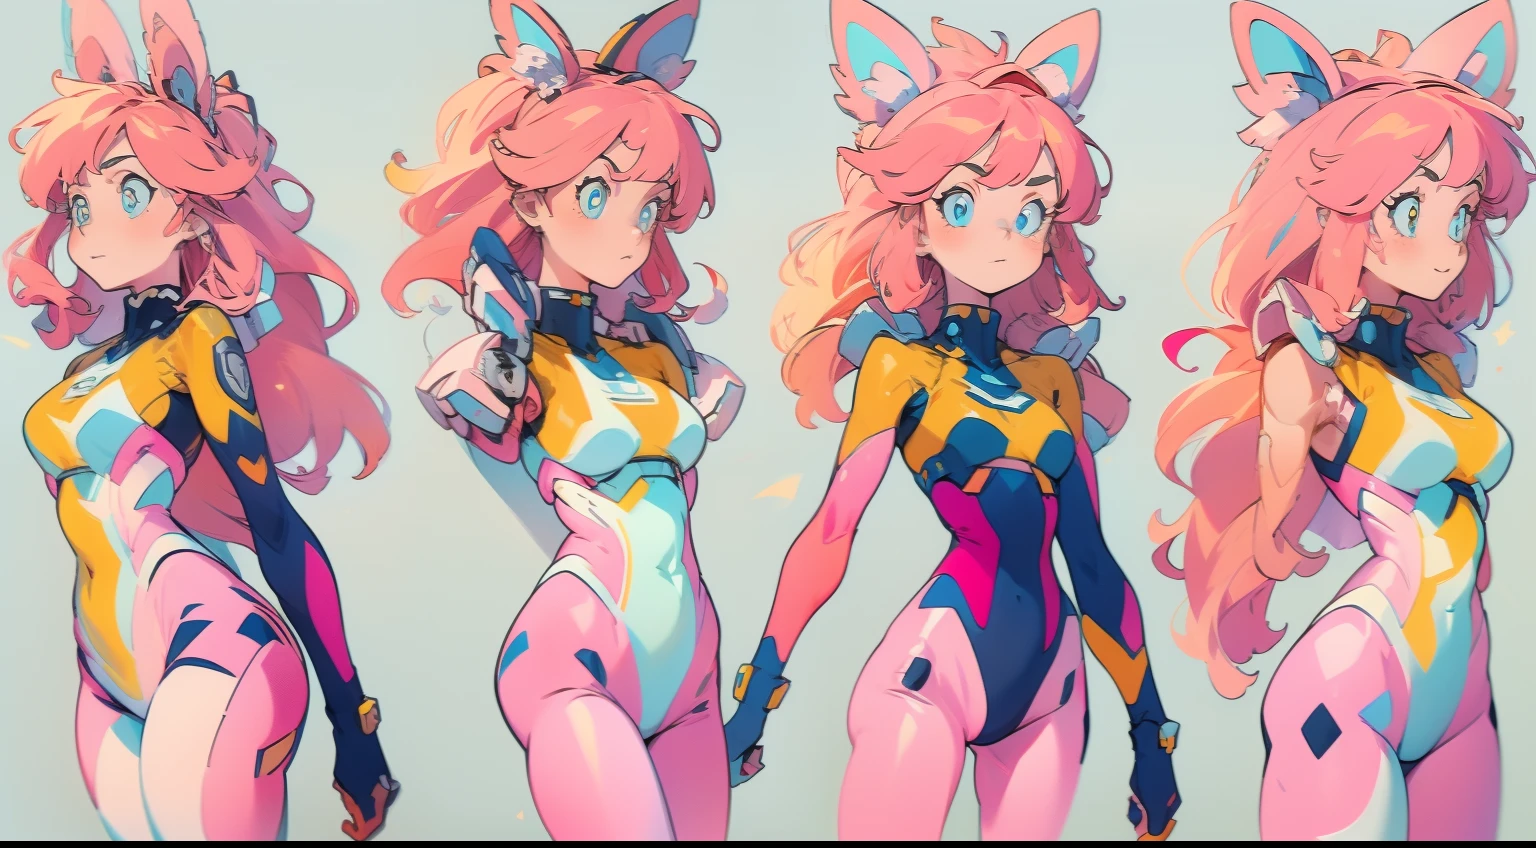 (masterpiece:1.2, best quality), 1woman, cute face, big eyes, round cubby cute face, smile, long legs, full body, adult mature female (spiky orange-pink hair, (orange-pink mullet 1.1)), (very long hair), blue eyes, (white/yellow pupil,) hero, sleeveless blue spandex bodysuit, long orange-pink rabbit ears, pink bodysuit ((masterpiece)), (((best quality))), (character design sheet, same character full body, front, side, back), Illustration, 1 girl, hair color, bangs, hair fax, eyes, environment change, pose kota, female